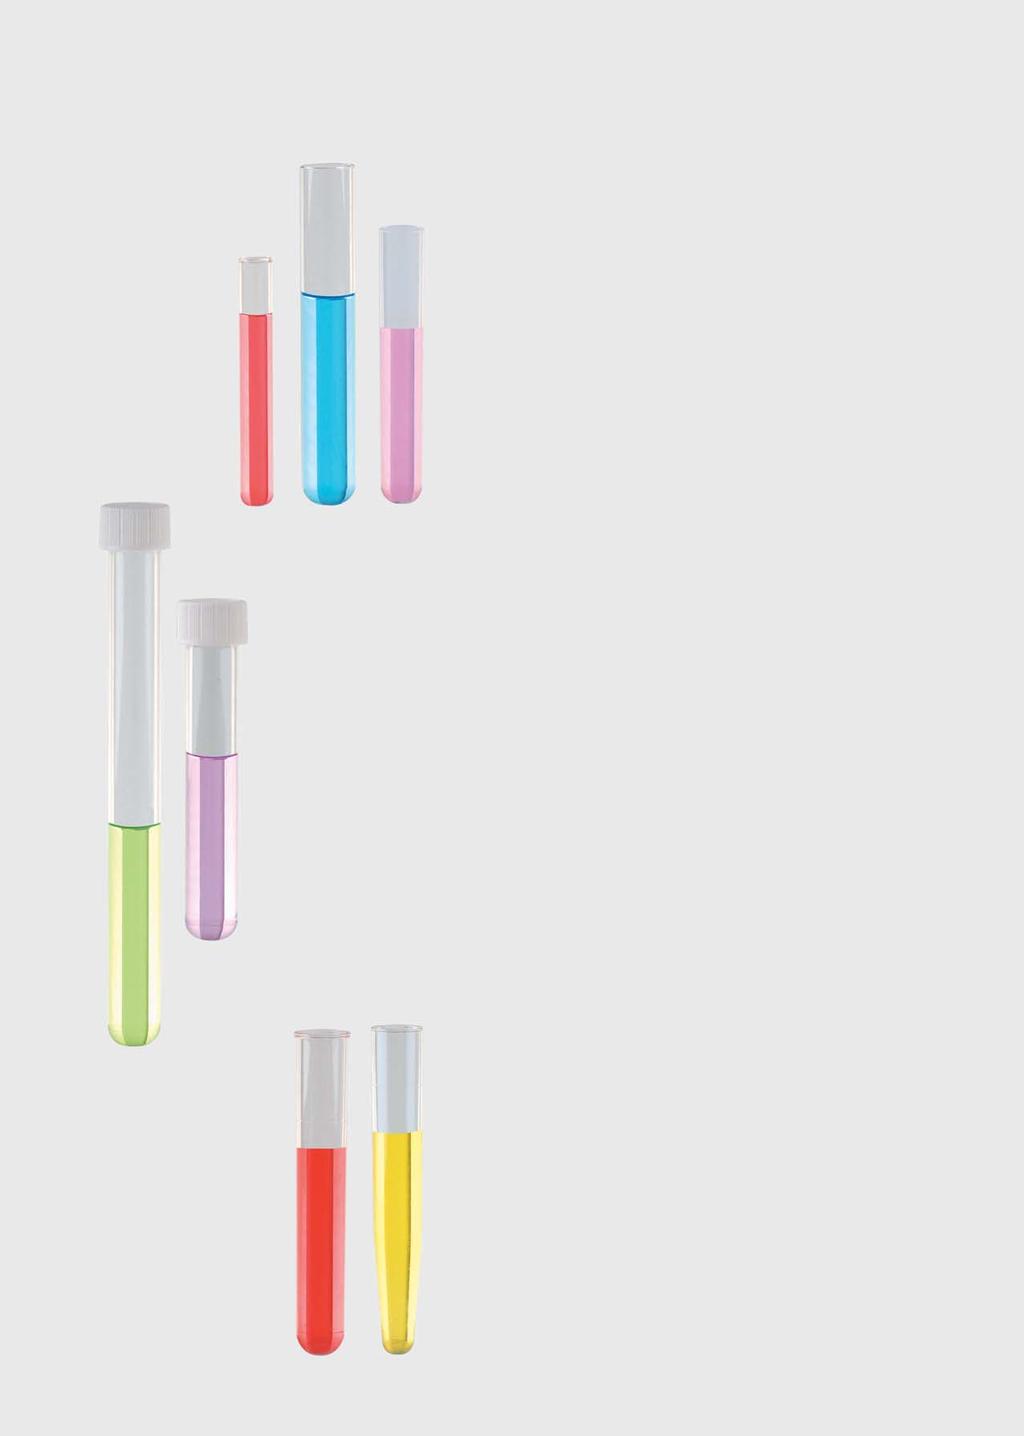 168 clinical laboratory test s glass Test Tubes are made from either neutral glass or heat resistant borosilicate 3.3 glass. Especially boro 3.3 s show excellent stability under temperature changes.